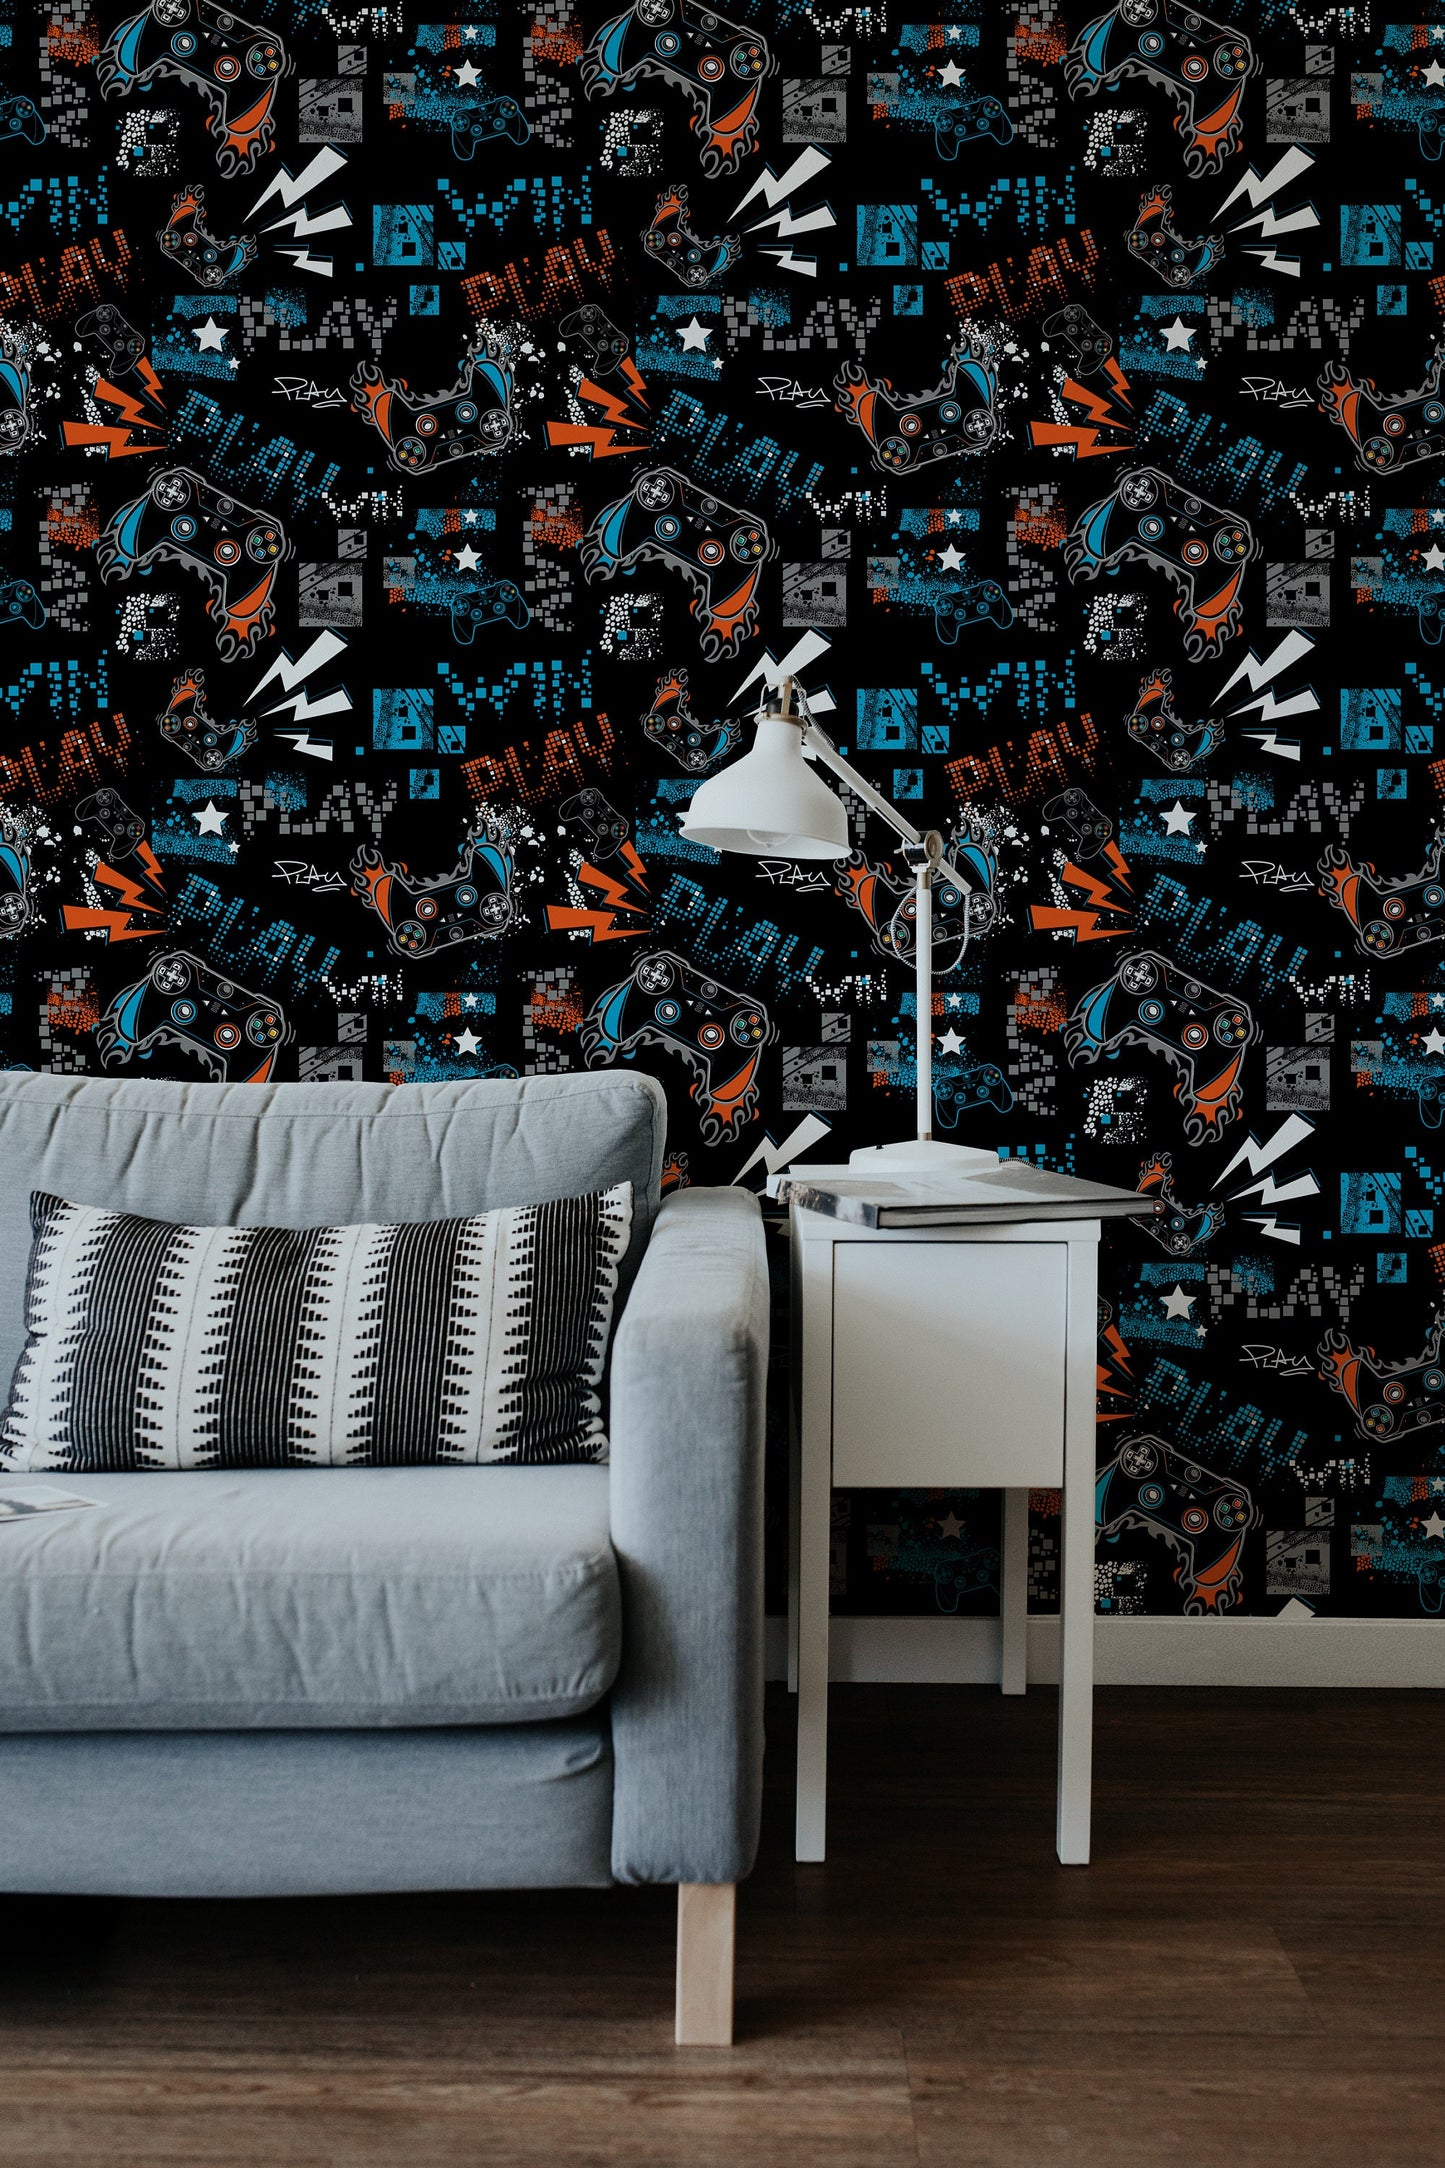 Wallpaper Peel and Stick Wallpaper Removable Wallpaper Home Decor Wall Art Wall Decor Room Decor / Video Game Wallpaper - B515